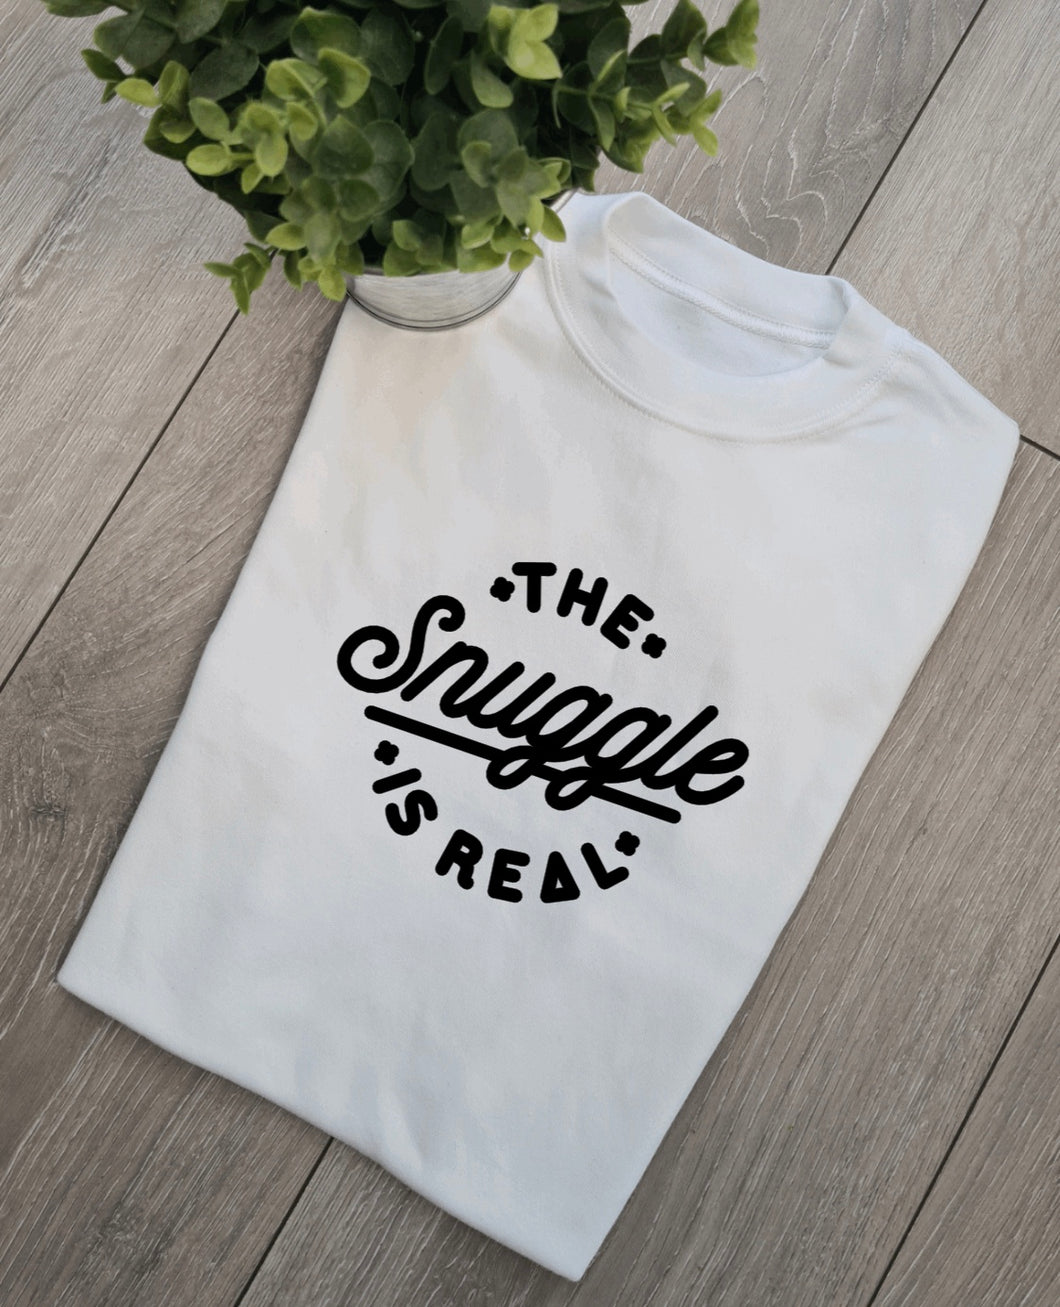 The snuggle is real Adults and Childs Tshirt